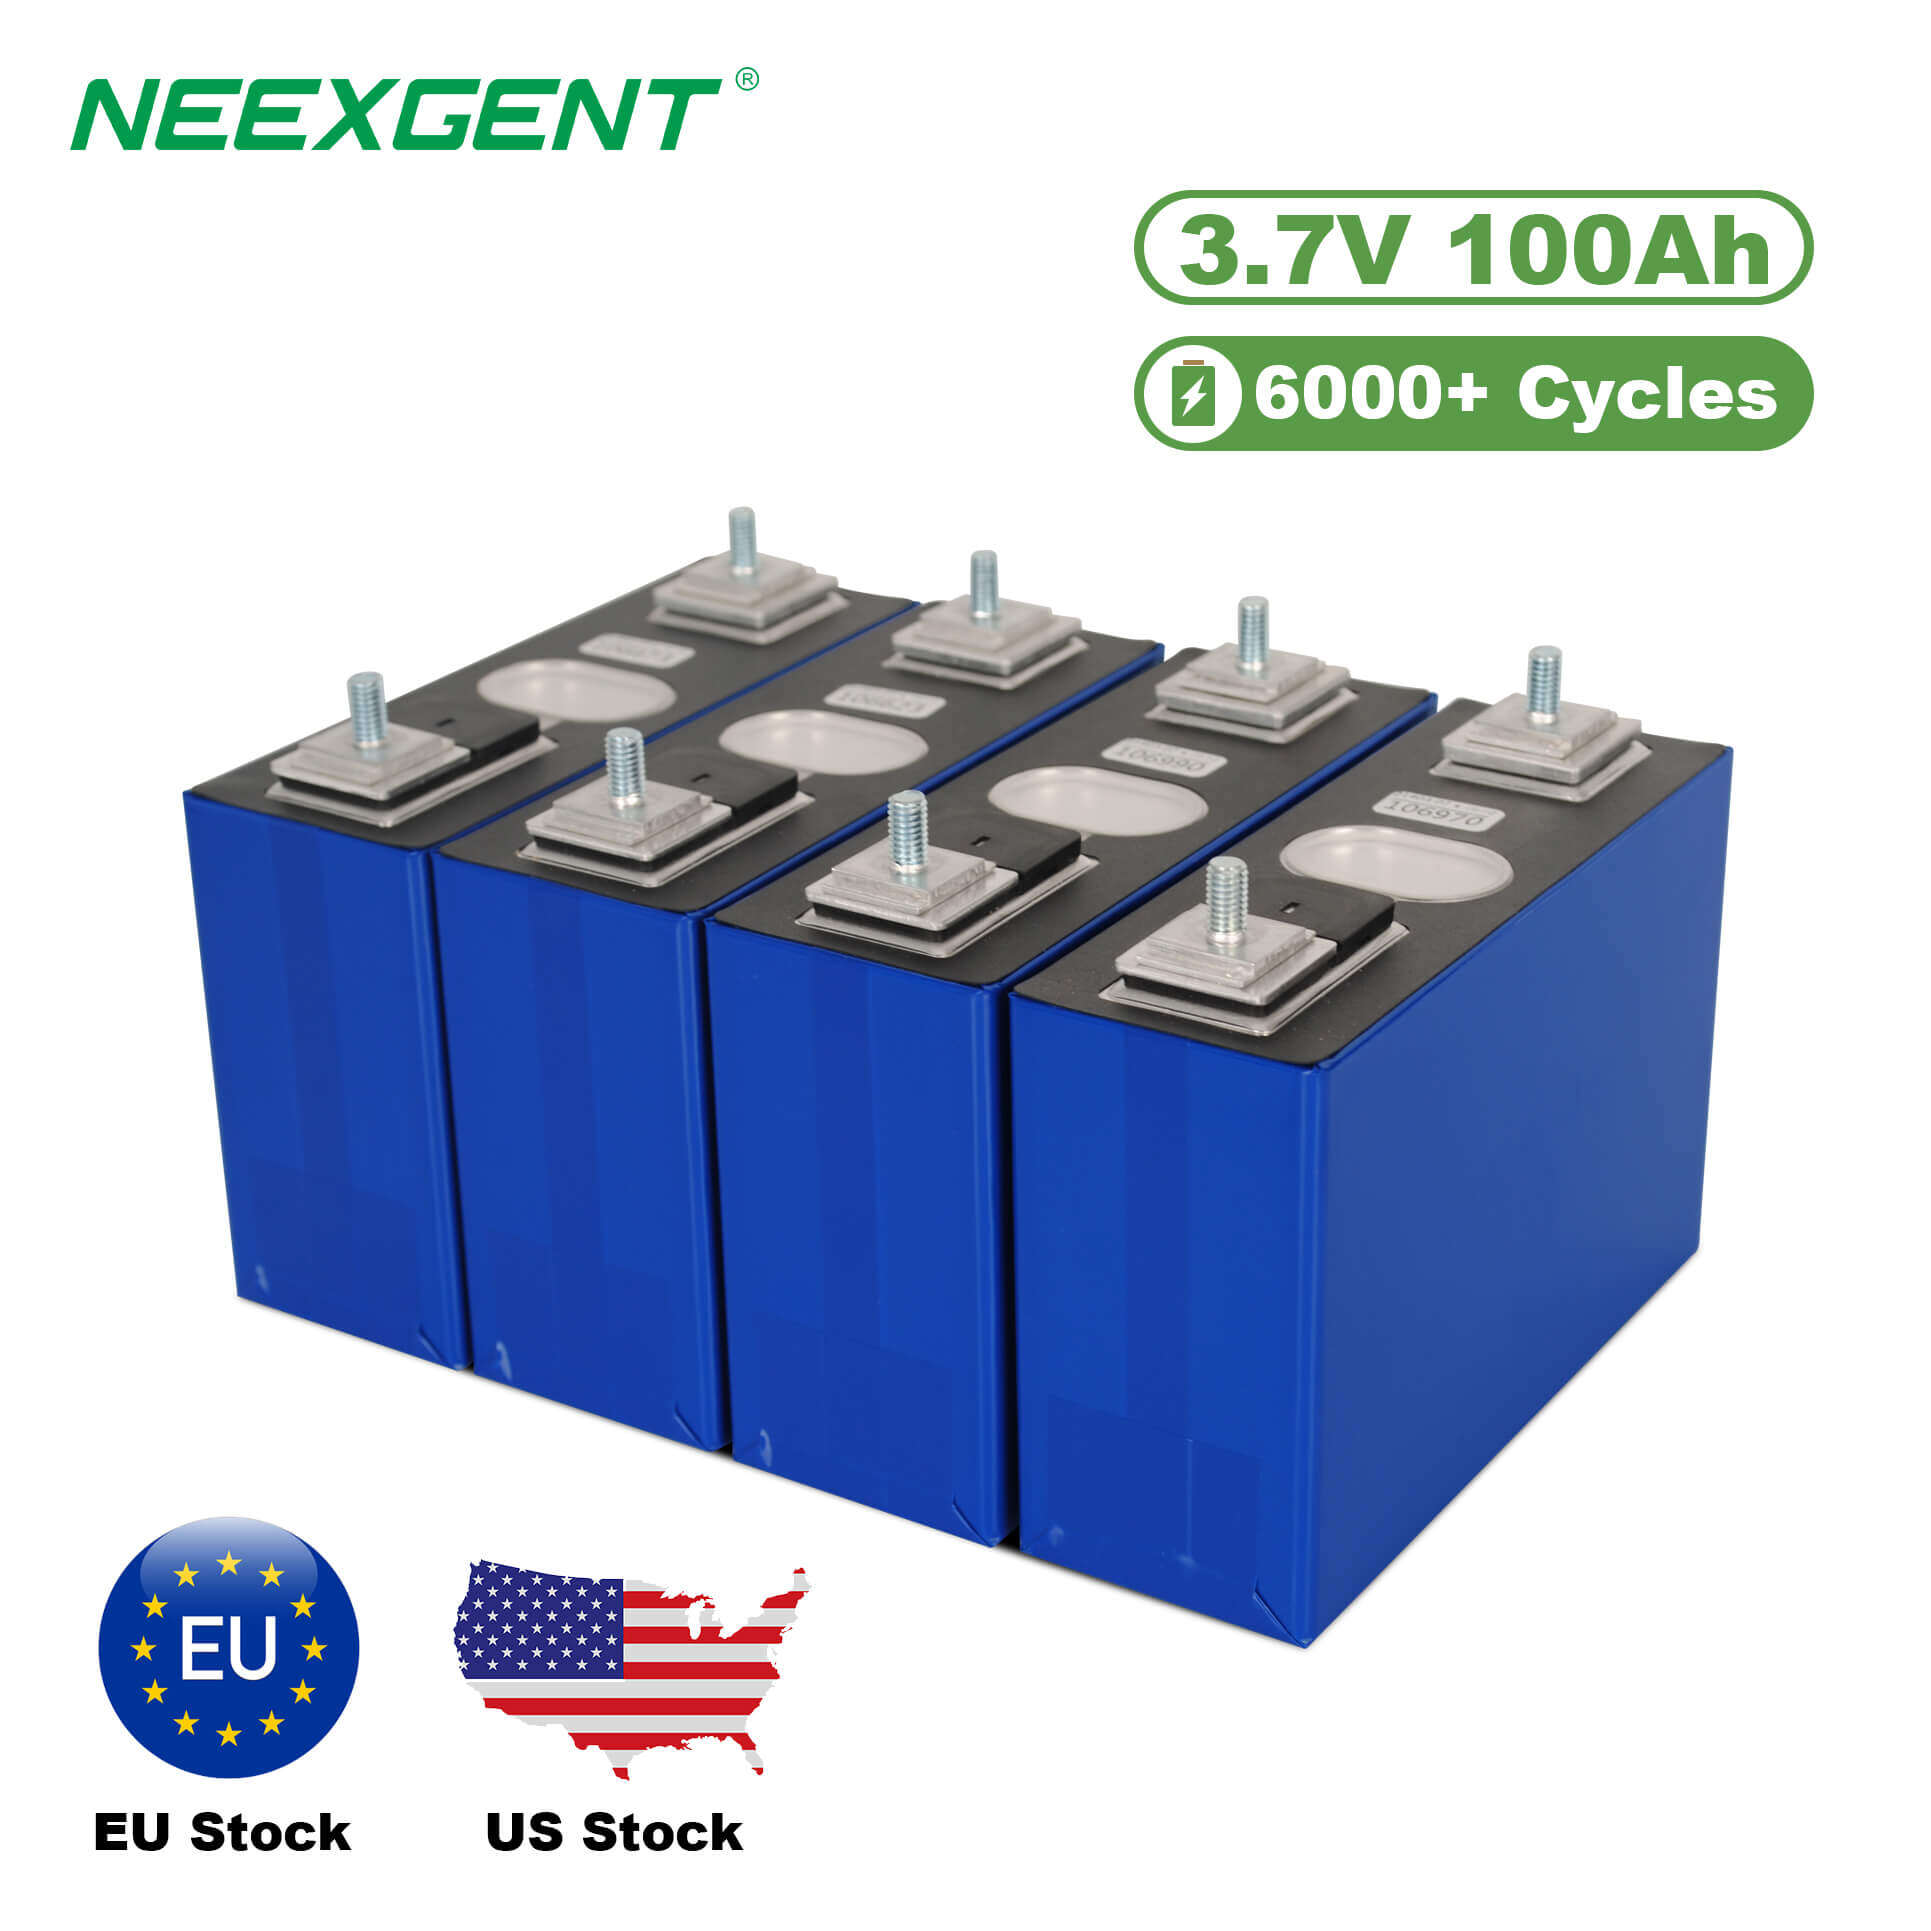 Neexgent Lifepo4 Lithium Battery 3.7v 100ah Lithium Iron Phosphate Battery Pack